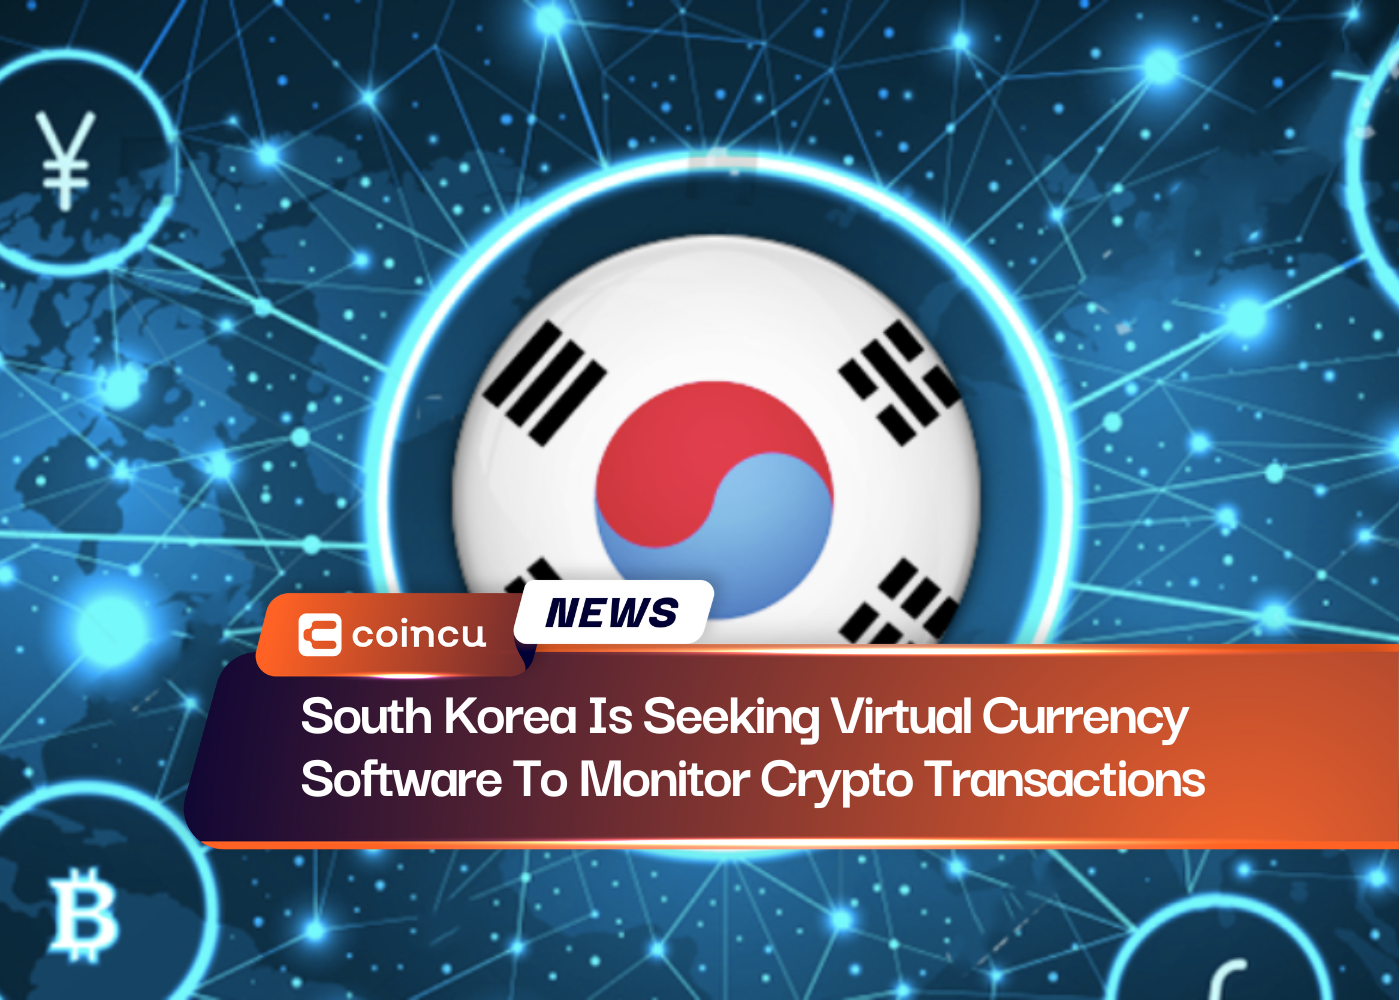 South Korea Is Seeking Virtual Currency Software To Monitor Crypto Transactions